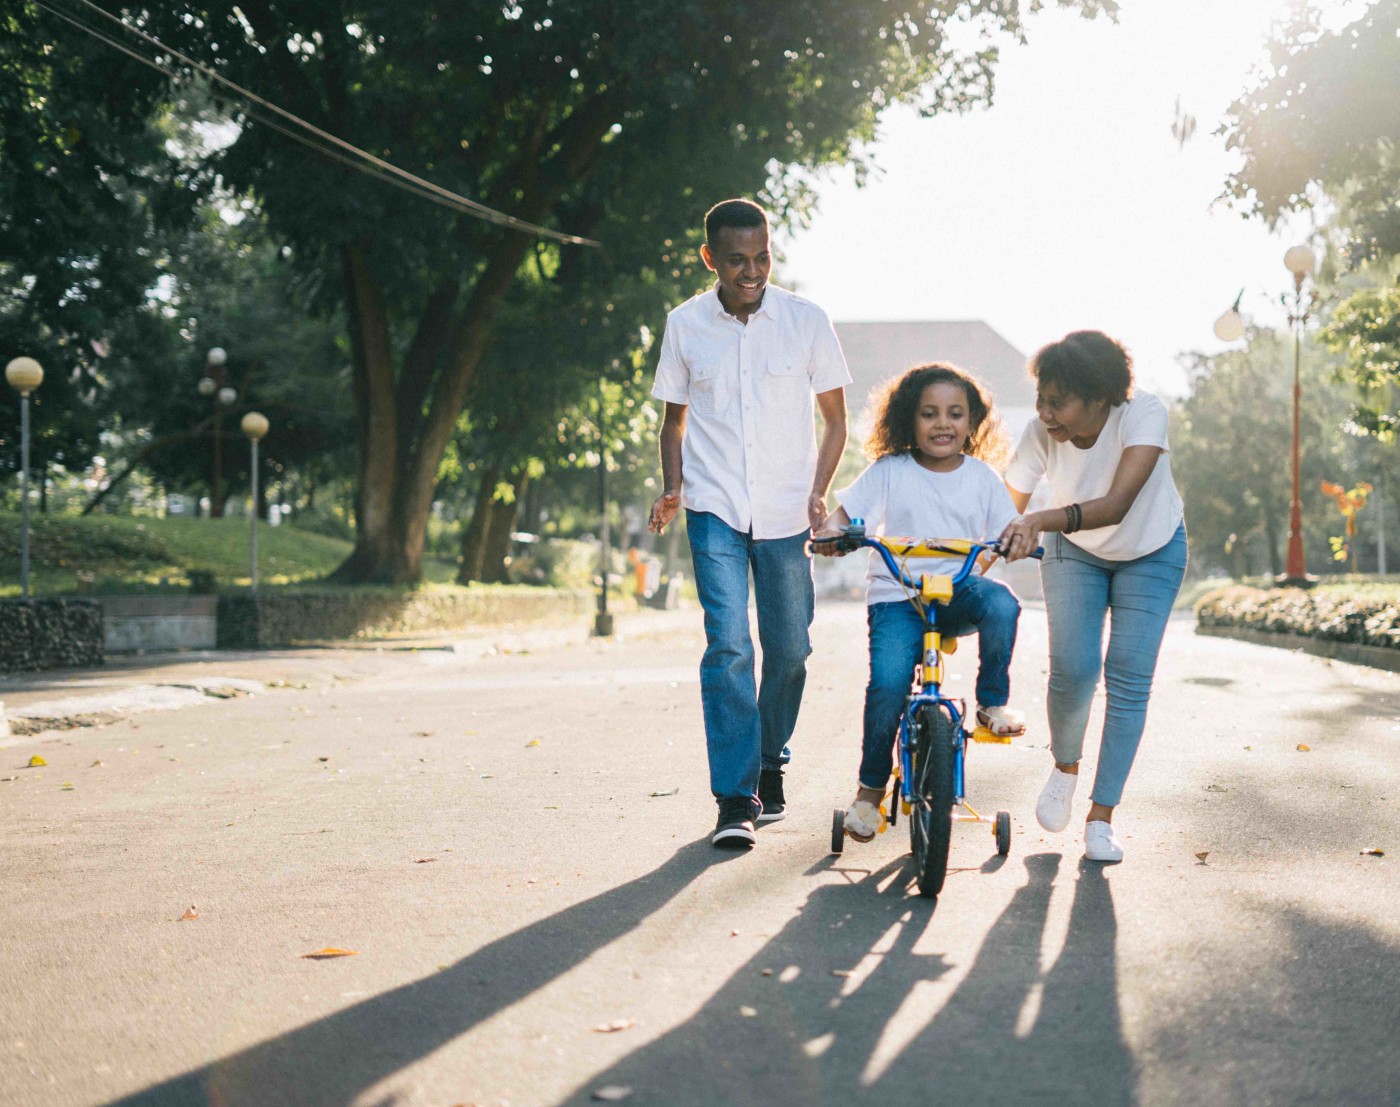 Image of child learning to ride a bike with the help of adults